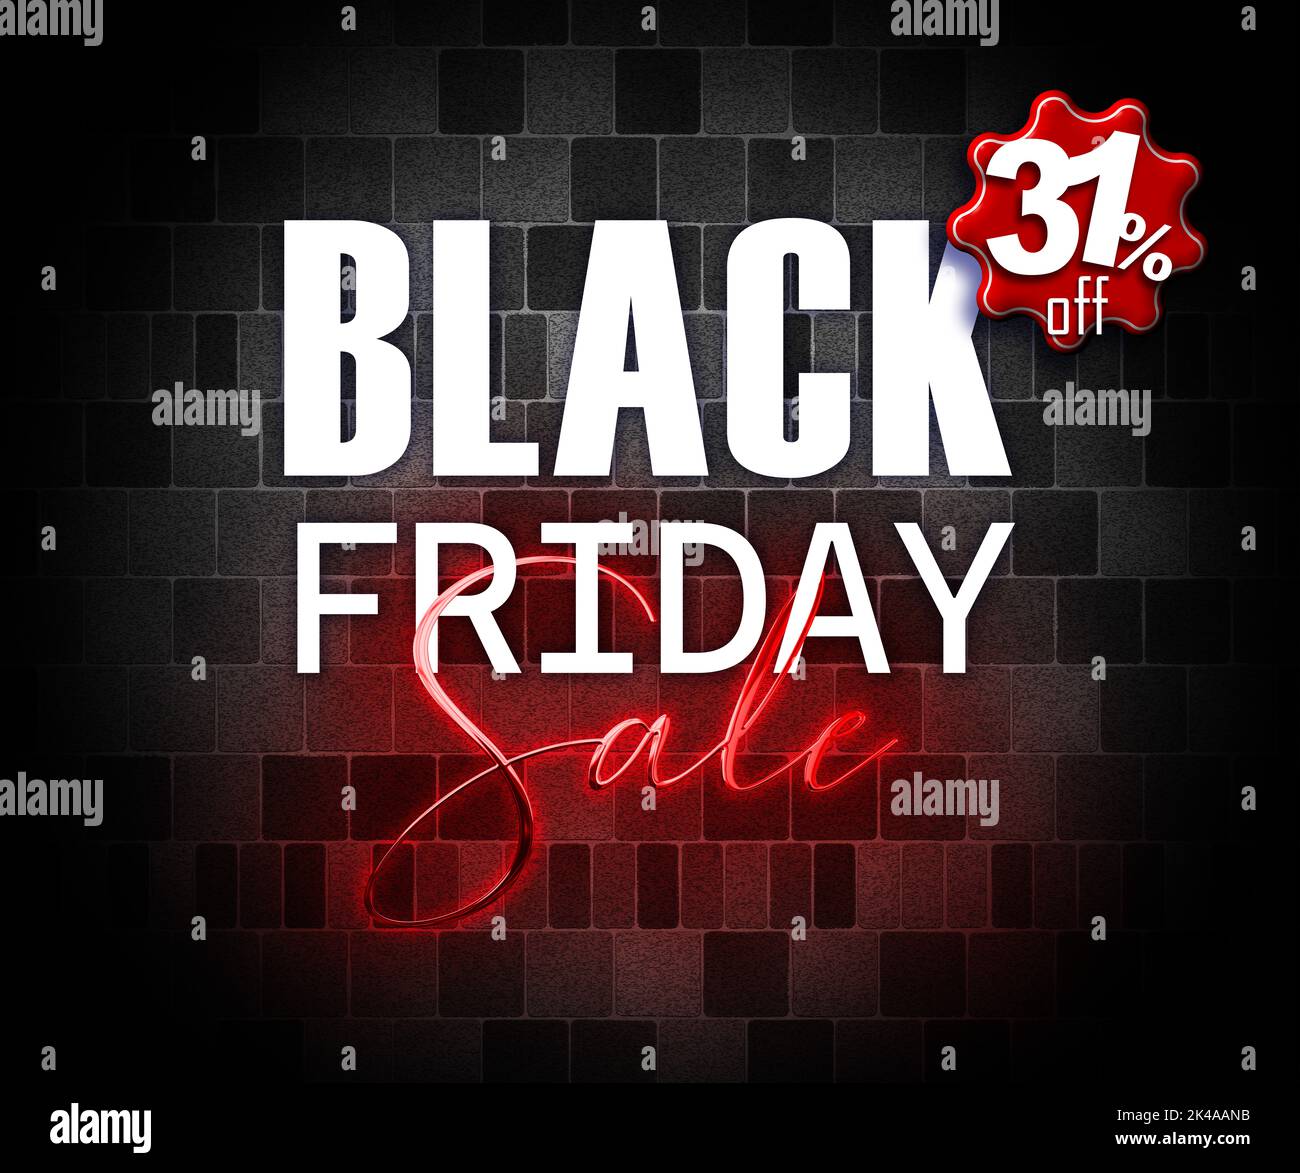 illustration with 3d elements black friday promotion banner 31 percent off sales increase Stock Photo